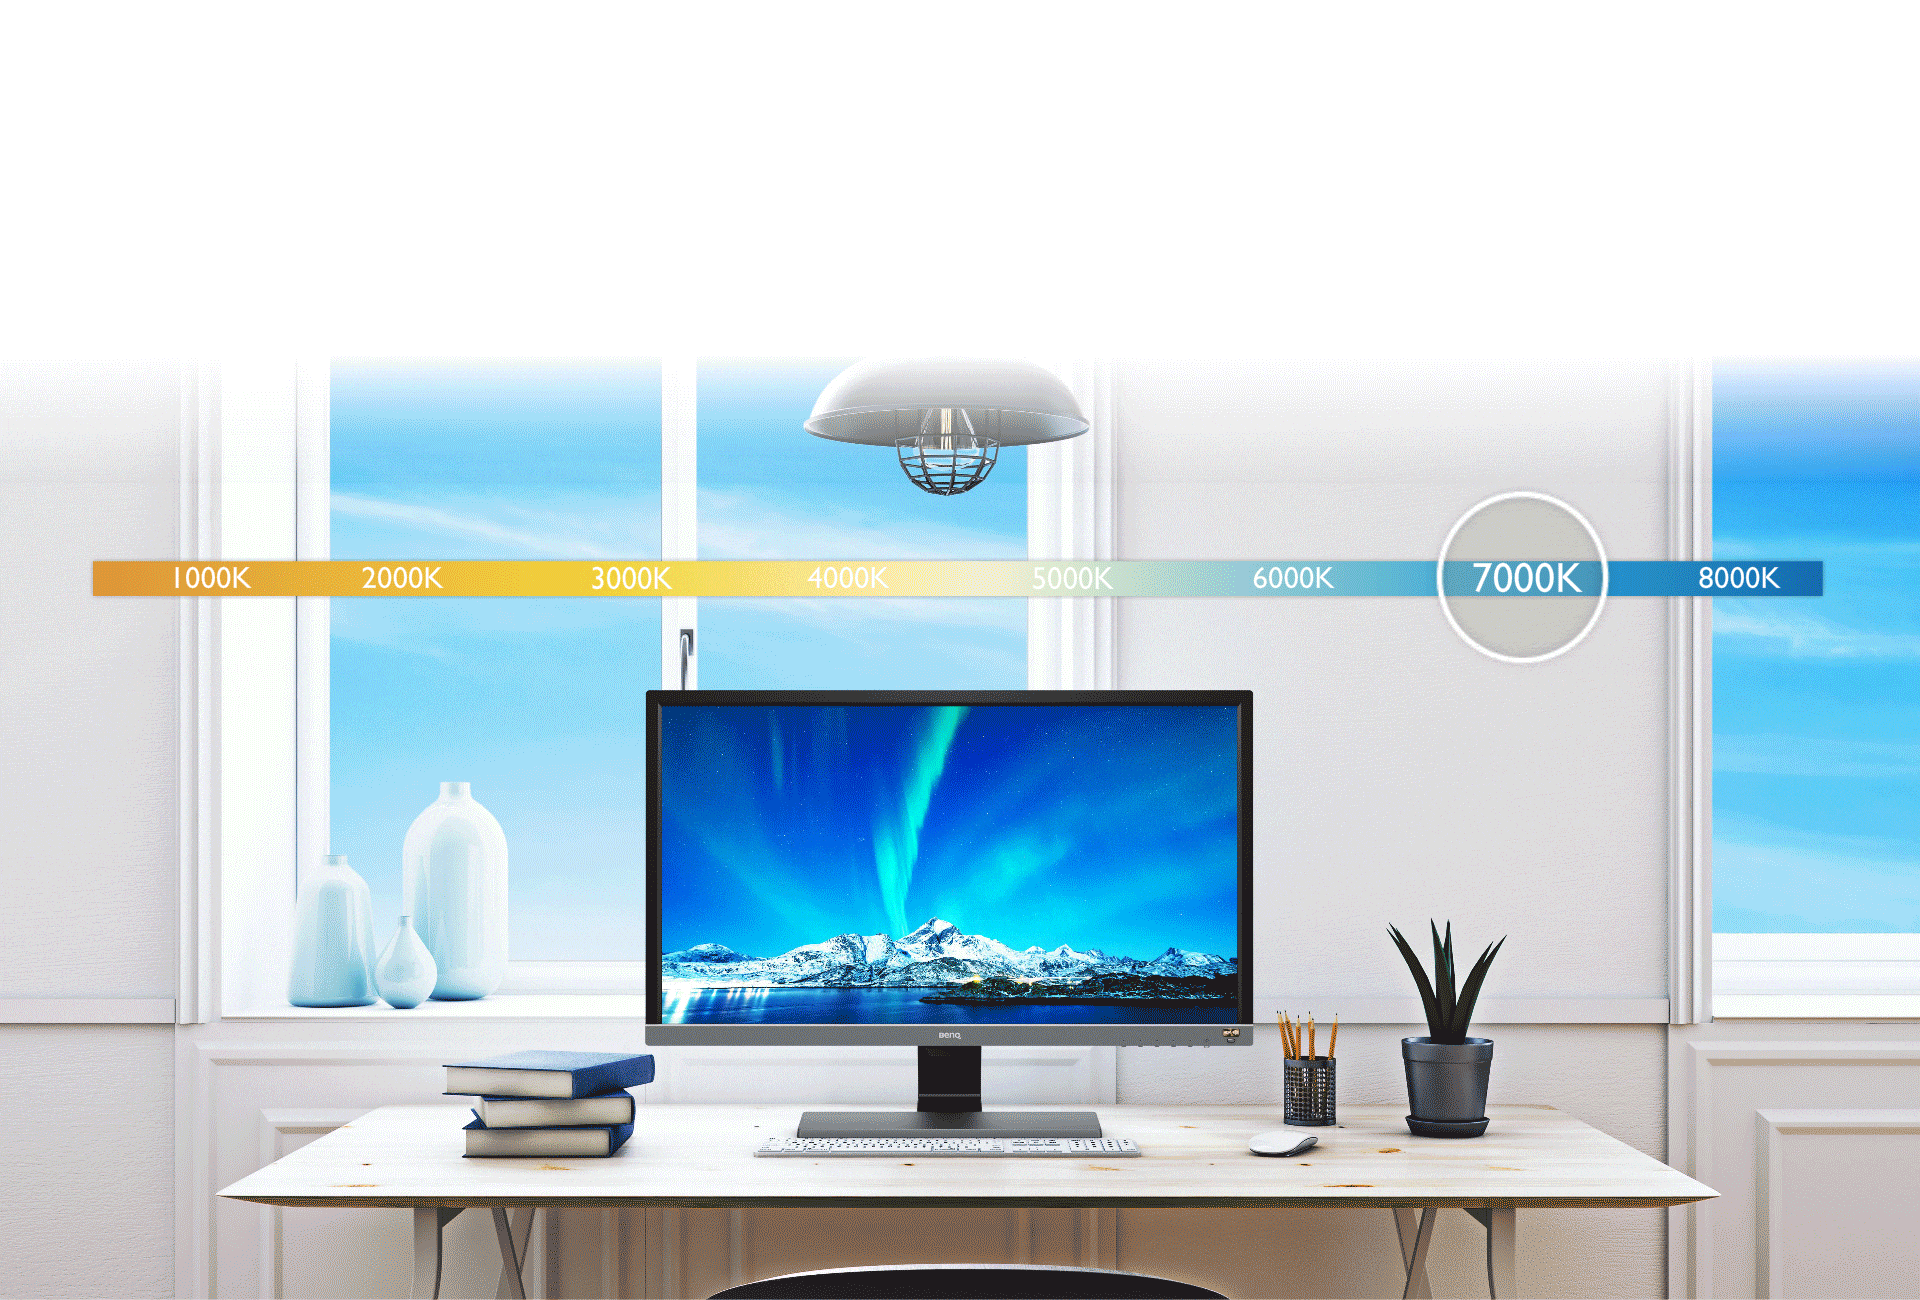 BenQ's gaming monitor EW2780's B.I. plus tech. is to brilliantly detect the ambient light levels and the color temperature in your viewing environment to automatically adjust on-screen brightness and color temperature for viewing comfort.